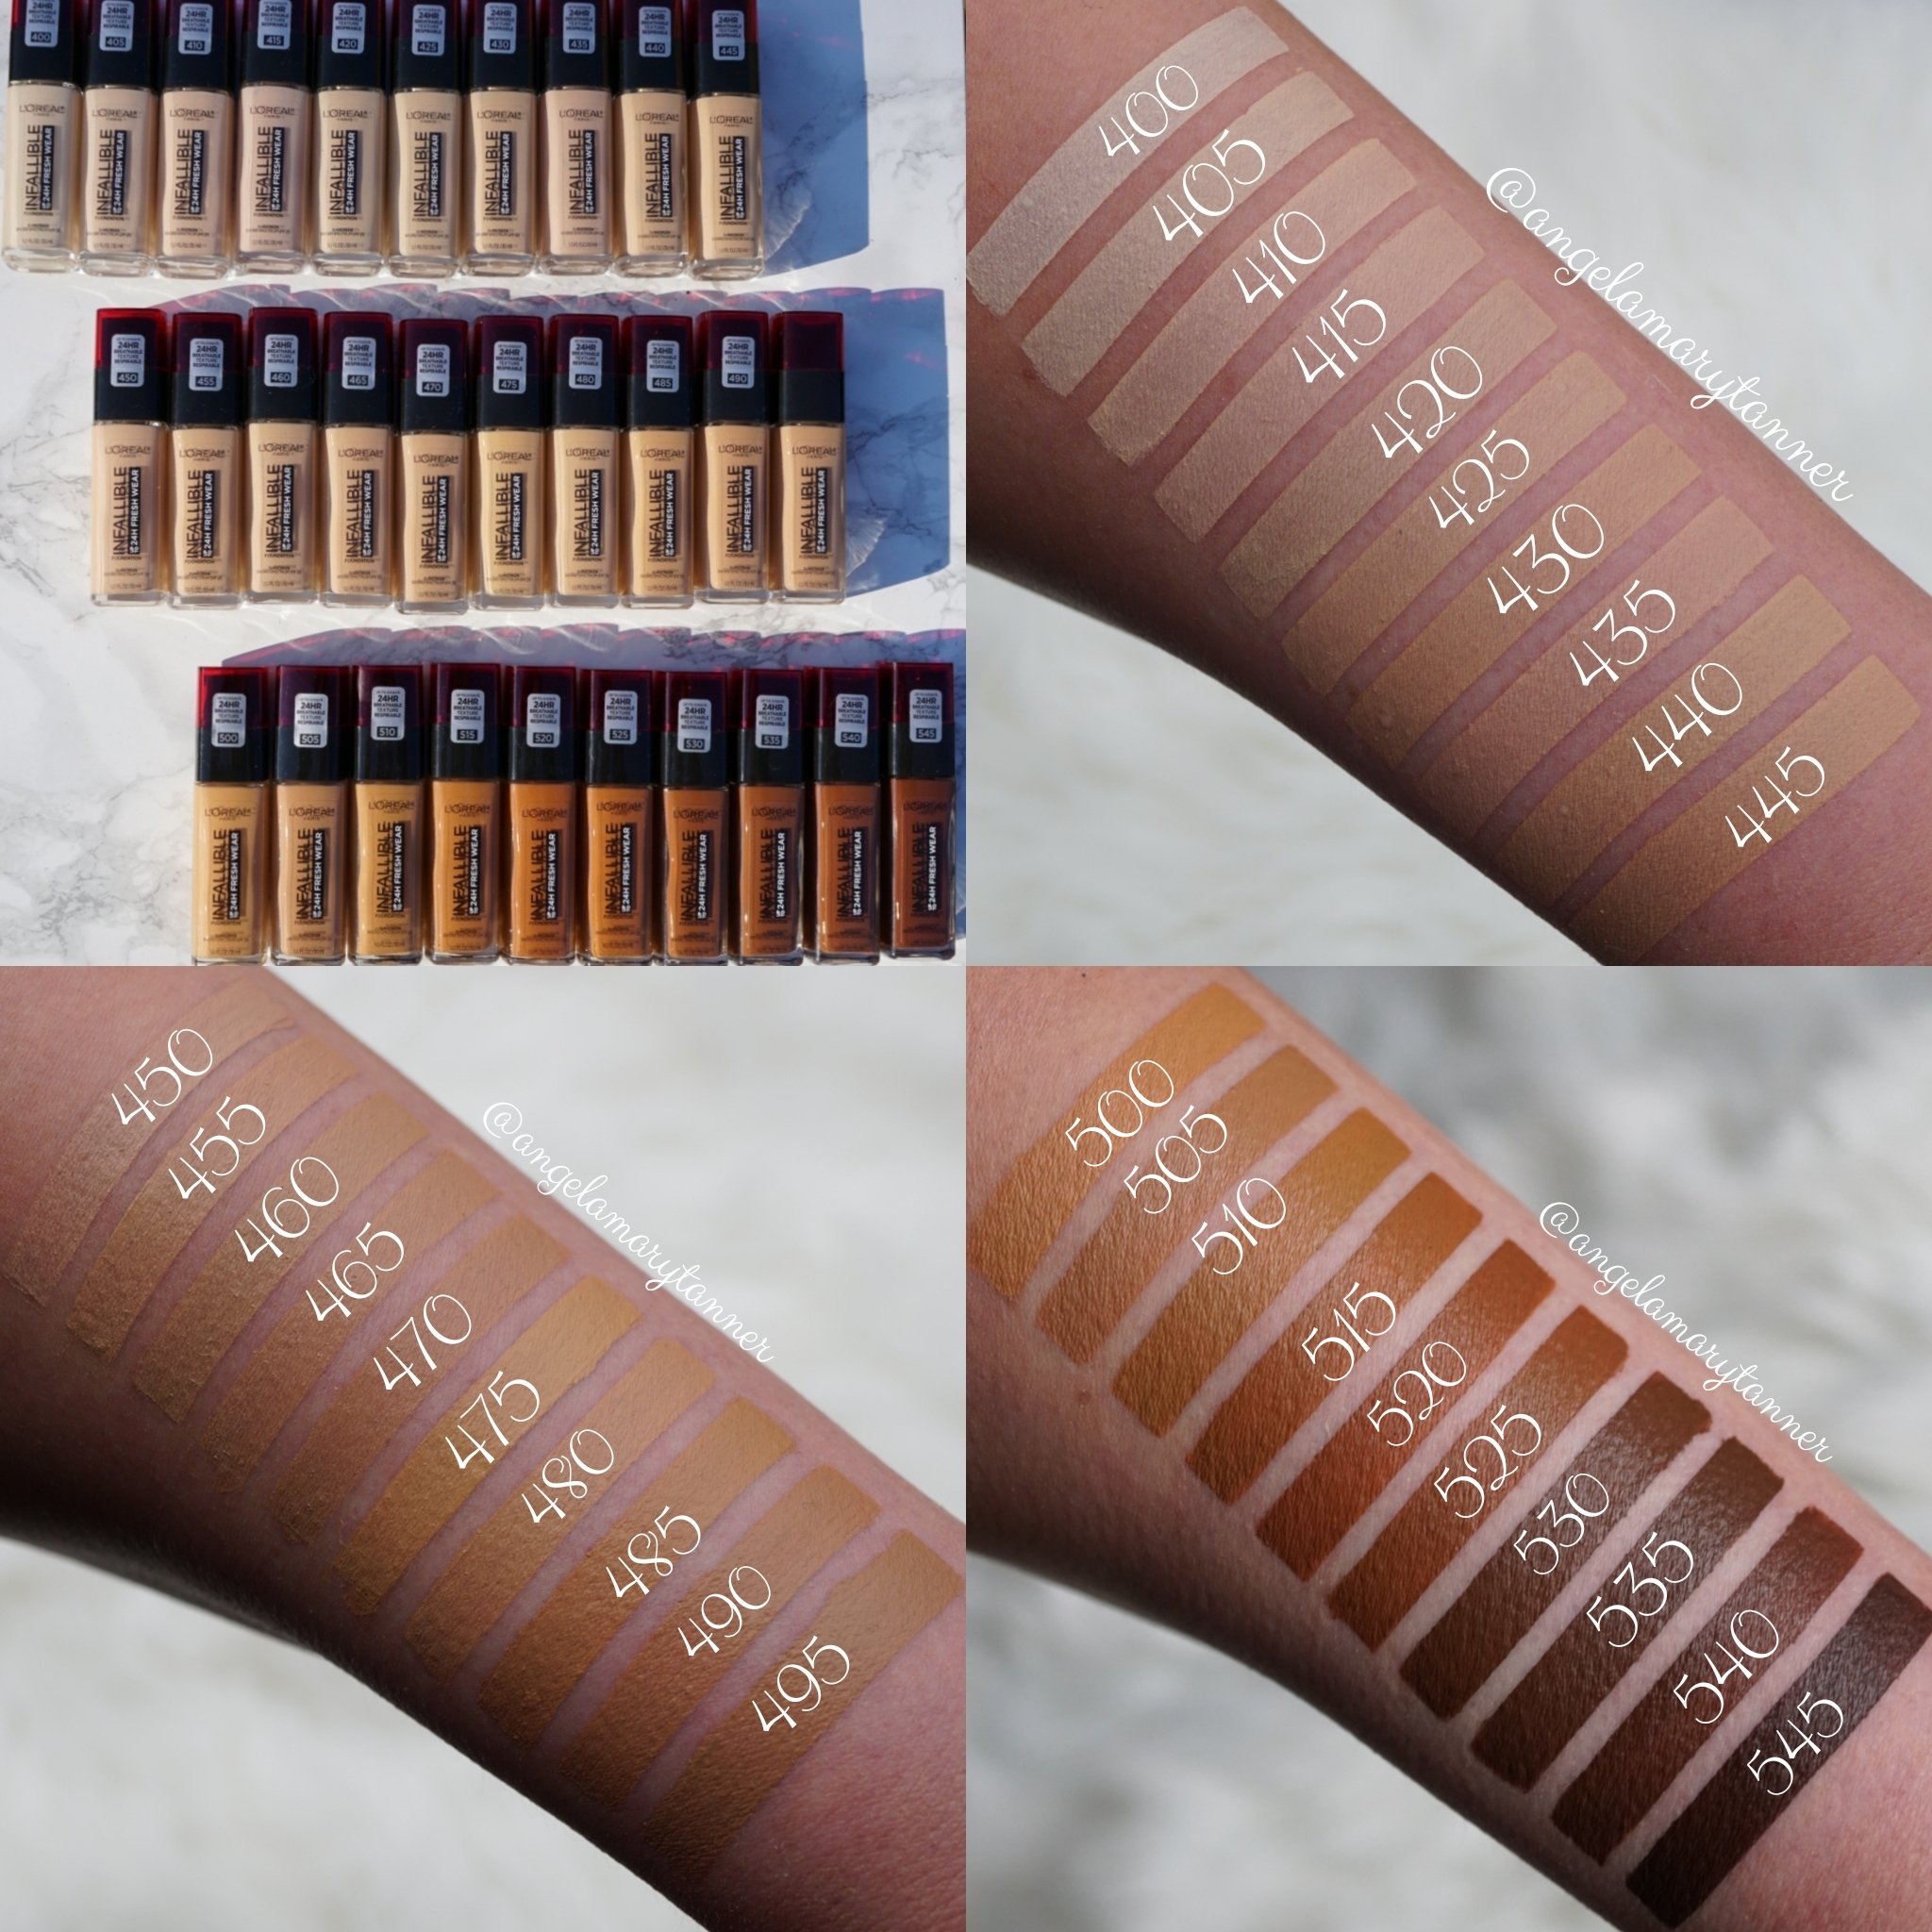 New L’Oreal Infallible Fresh Wear 24HR Foundation: Review and Swatches